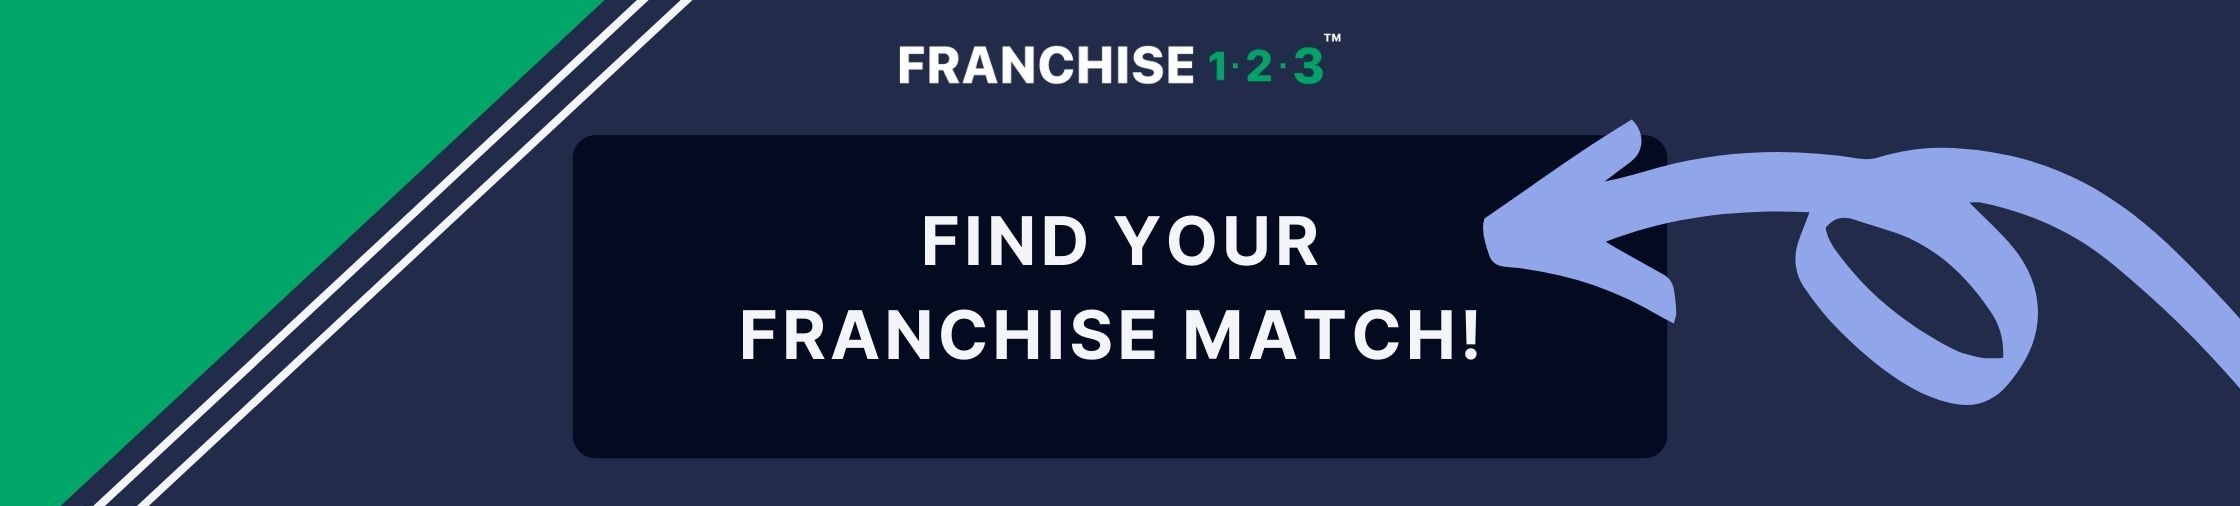 Find Your Franchise Match!